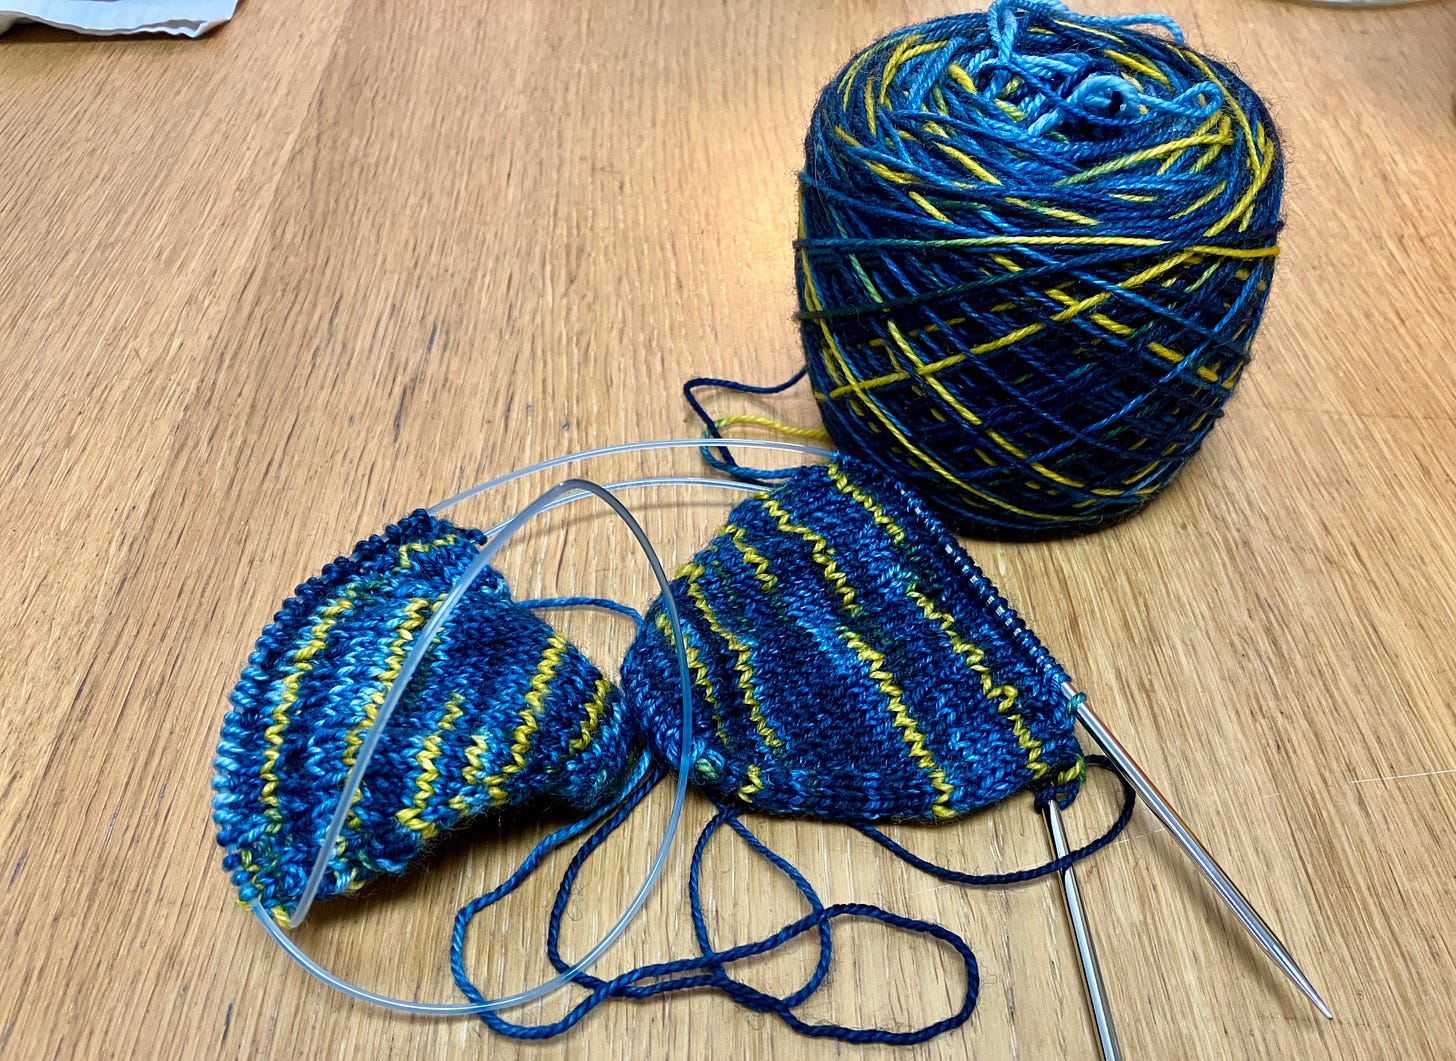 the toe-portion of two socks out of a variegated blue and yellow yarn are on a single long circular needle, sitting next to the skein they are being knit from. 